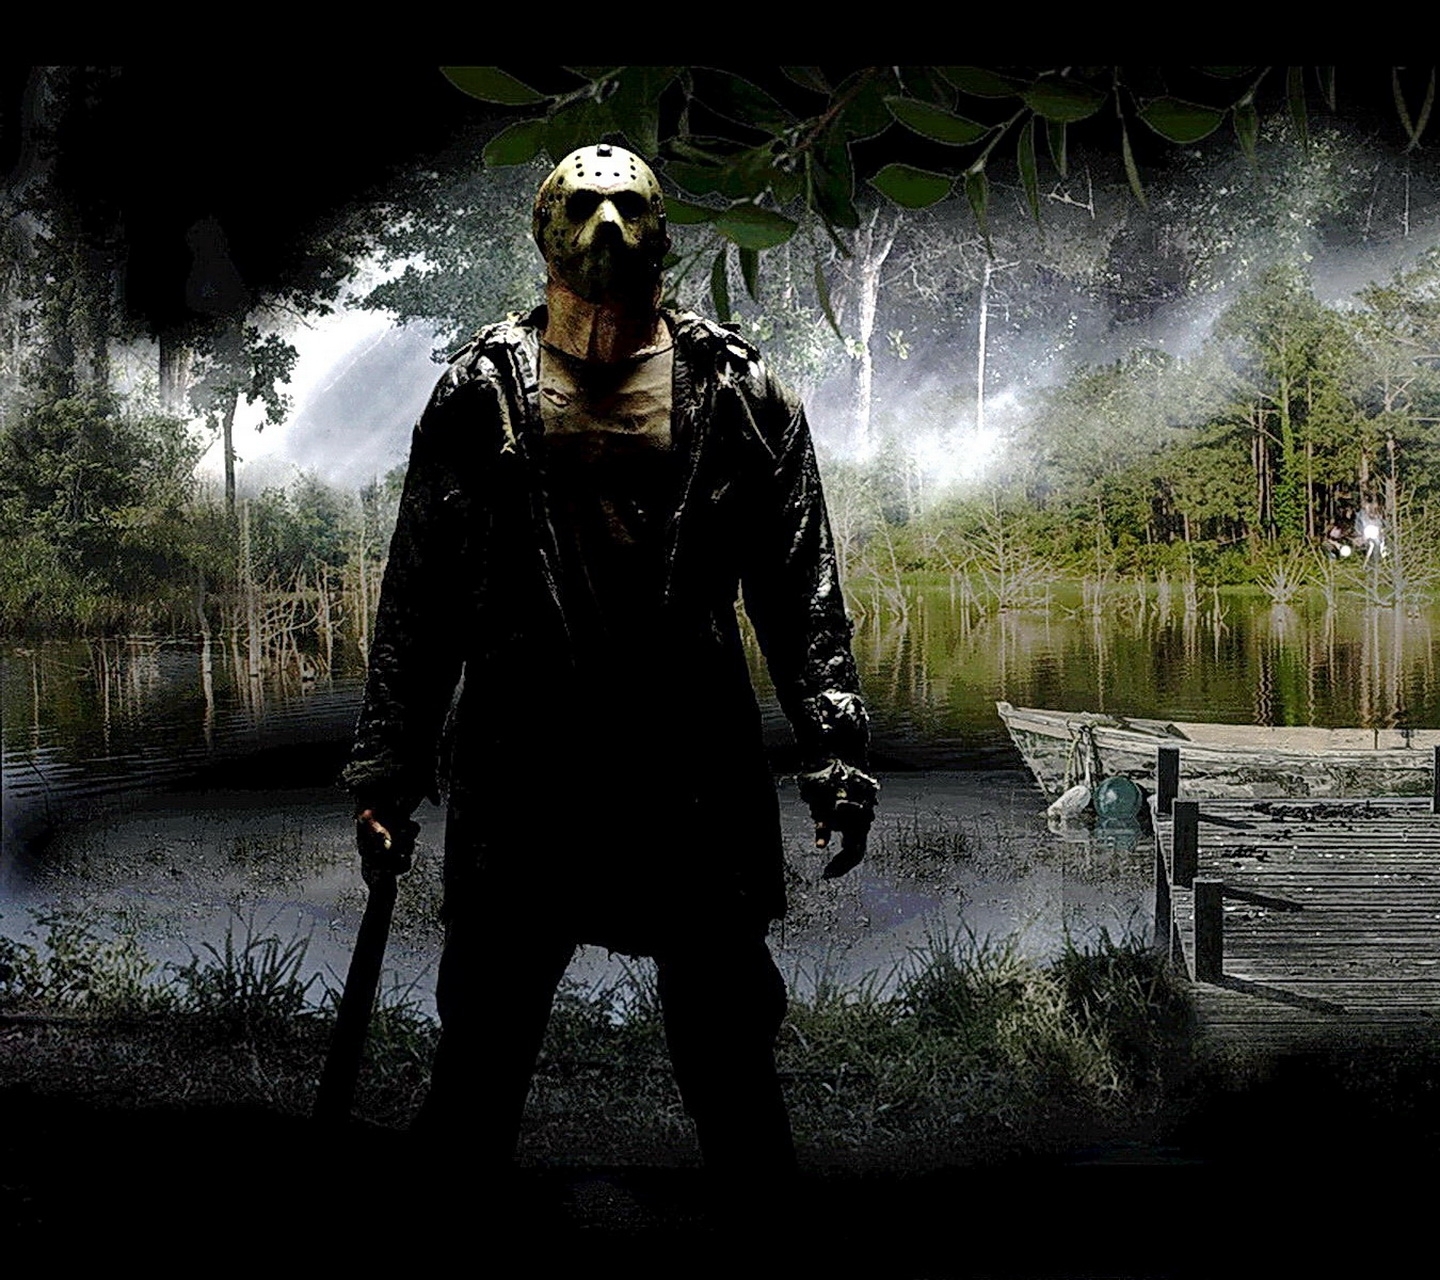 10 New Friday The 13Th Wallpaper Hd FULL HD 1920×1080 For PC Desktop 2021